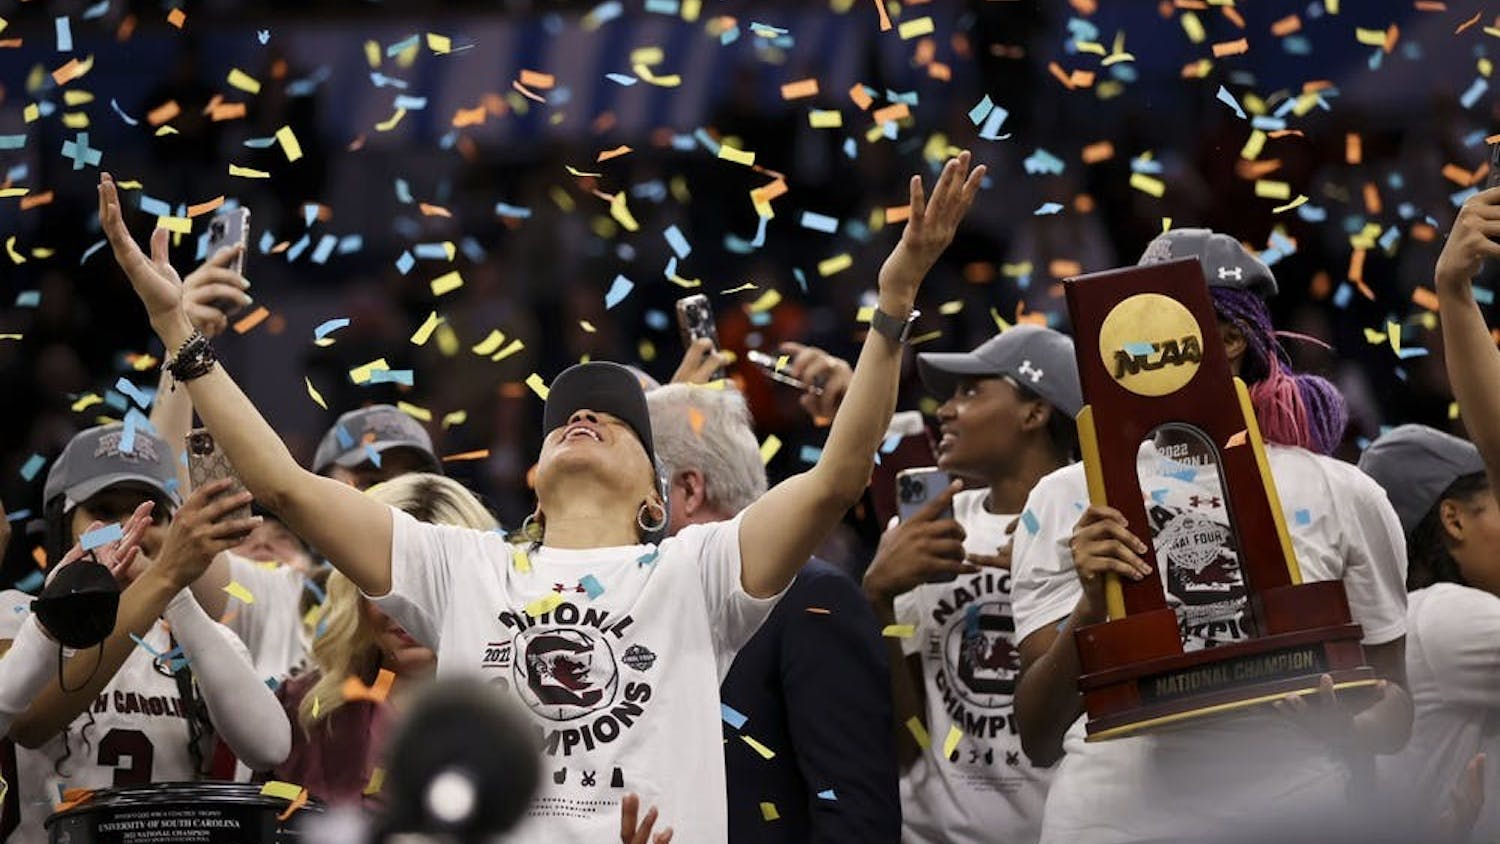 Head coach Dawn Staley takes in the confetti after South Carolina won the National Championship. The Gamecocks defeated the Huskies 64-49 on April 3, 2022 at Target Center in Minneapolis, MN.